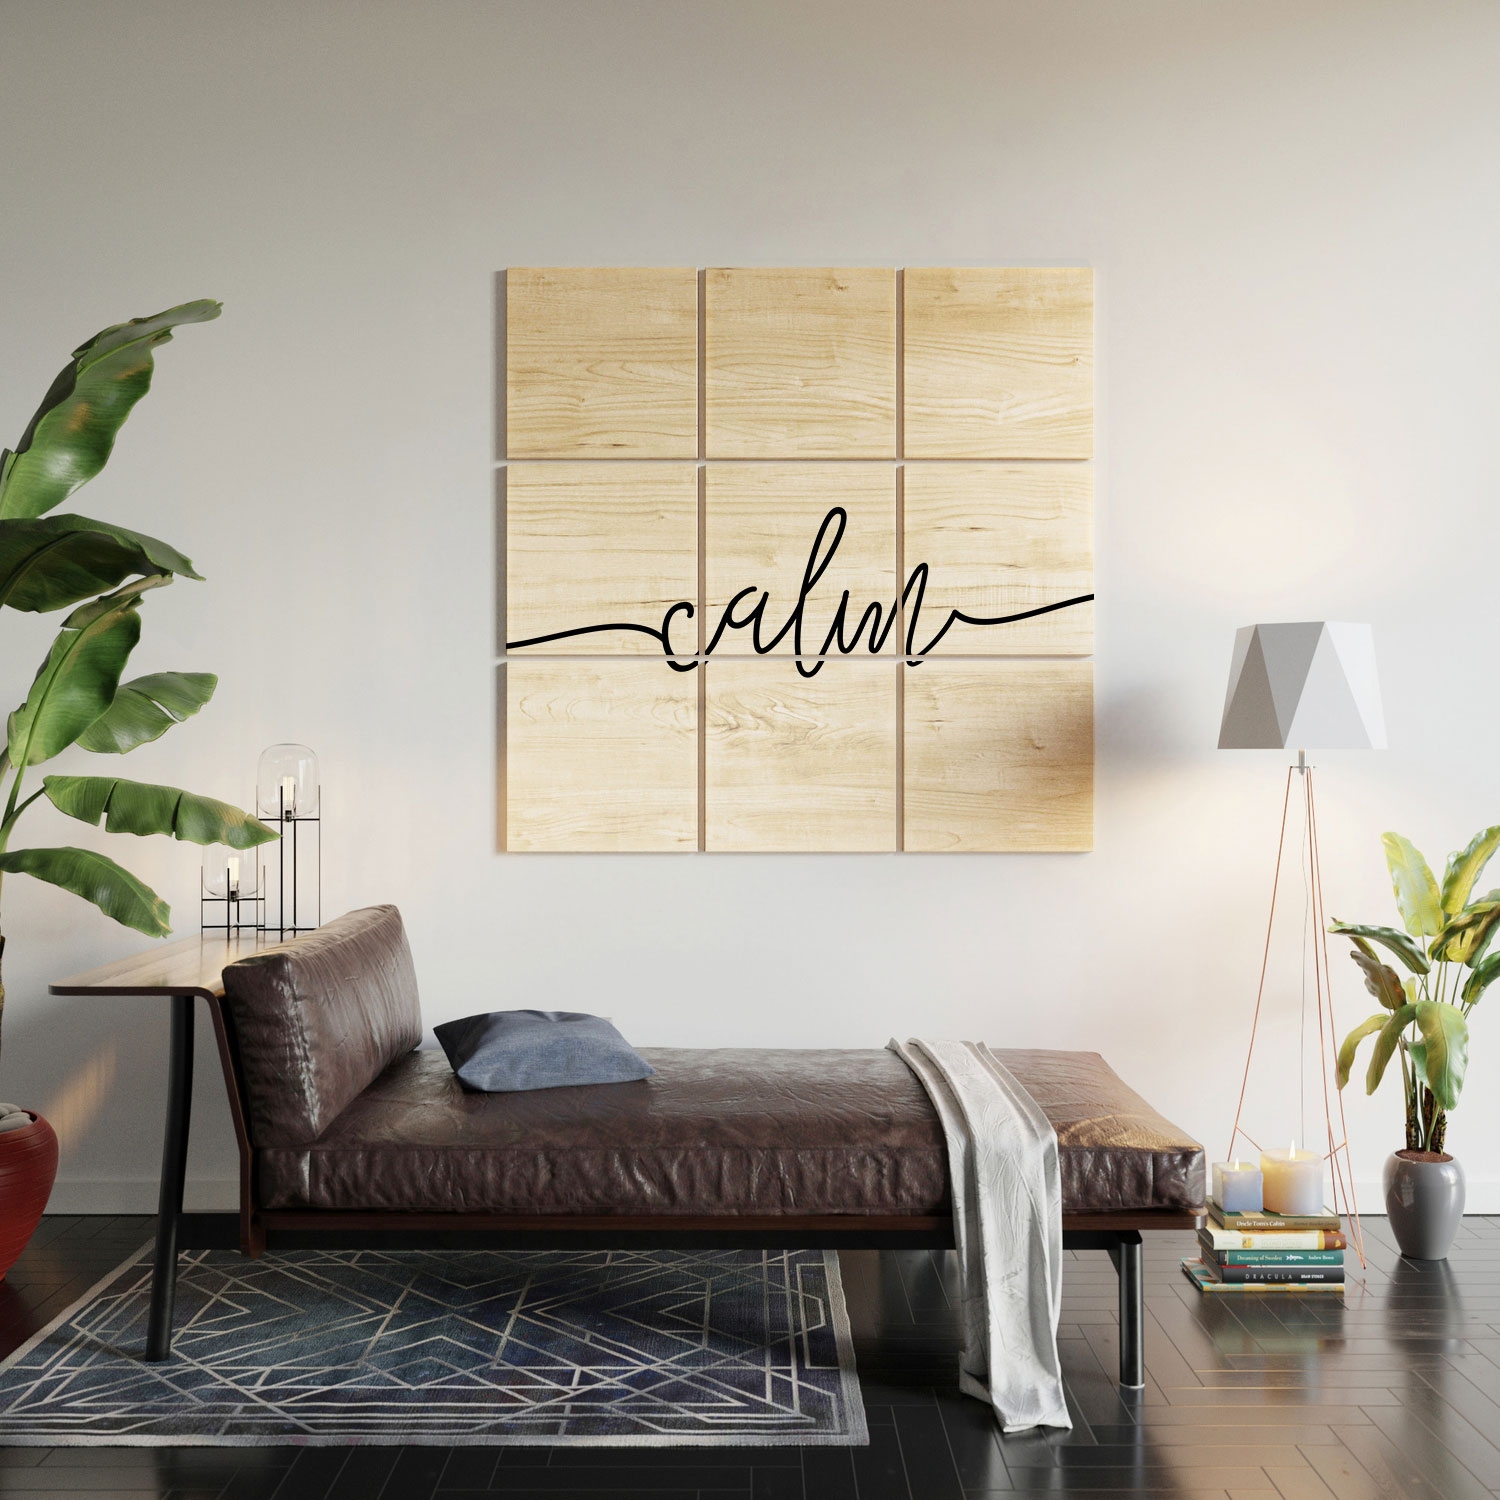 Calm Typo by Sisi and Seb - Wood Wall Mural4' x 4' (Nine 16" Wood Squares) - Image 1